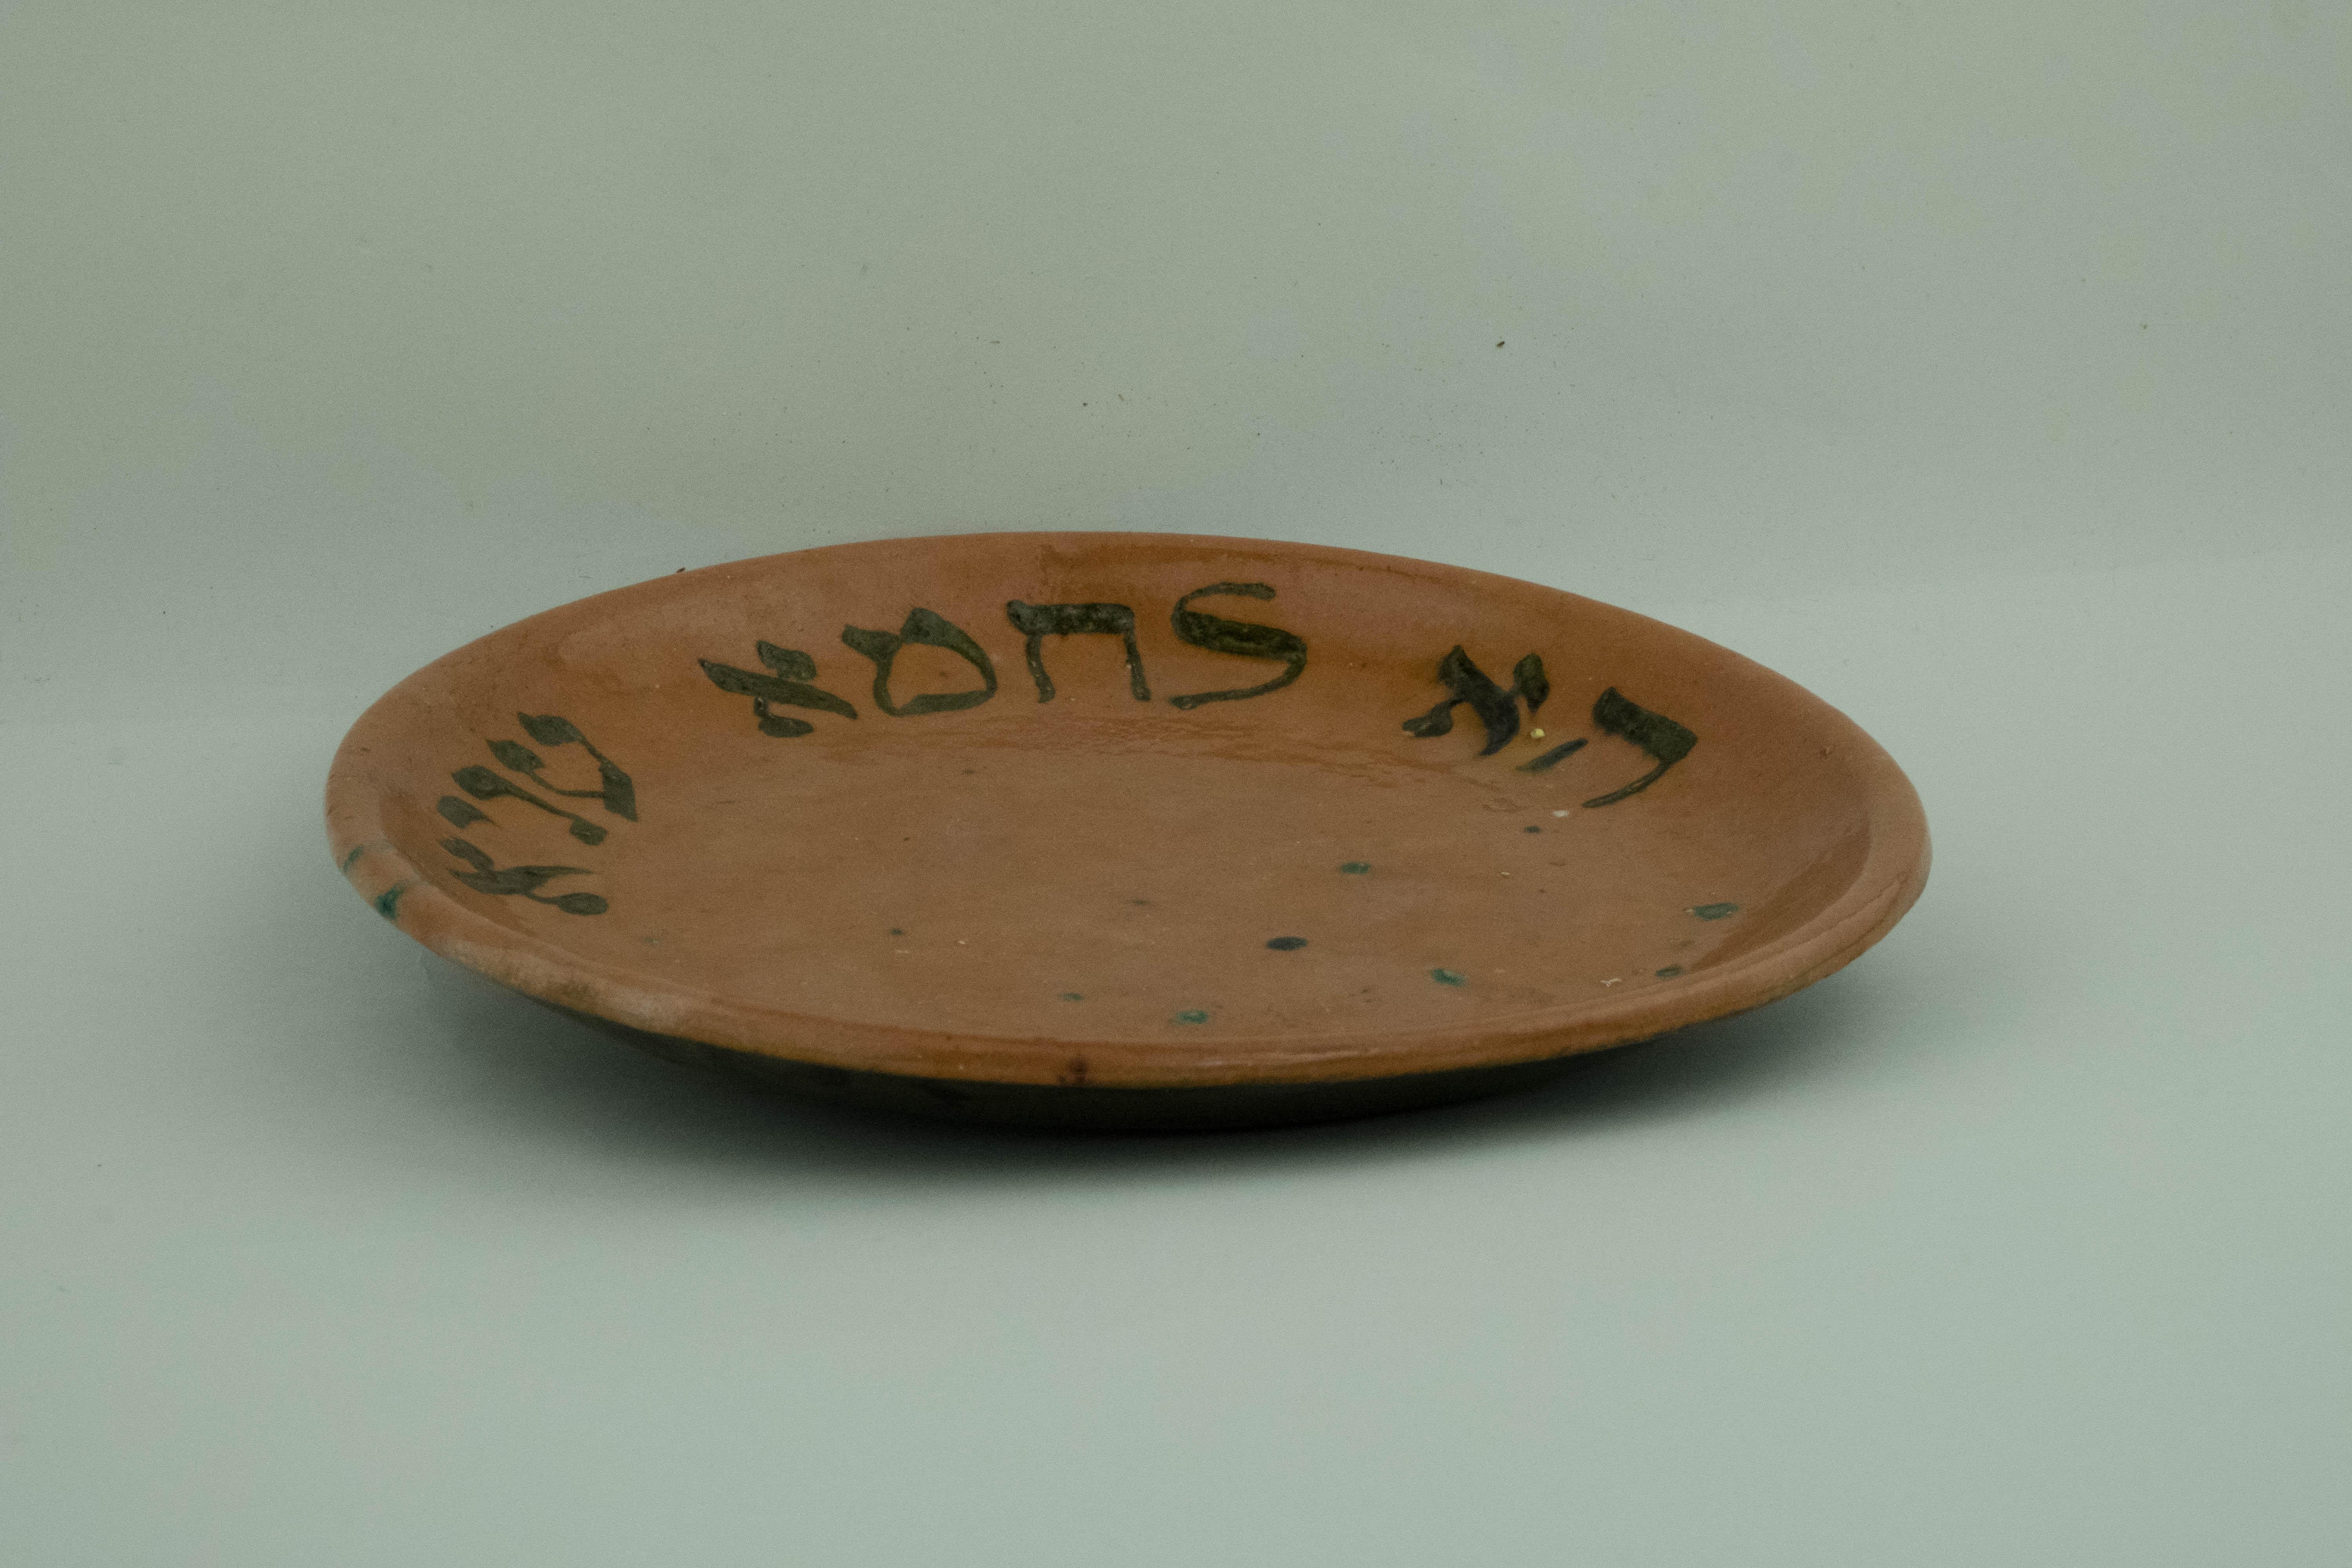 European Early 20th Century Glazed Earthenware Passover Plate